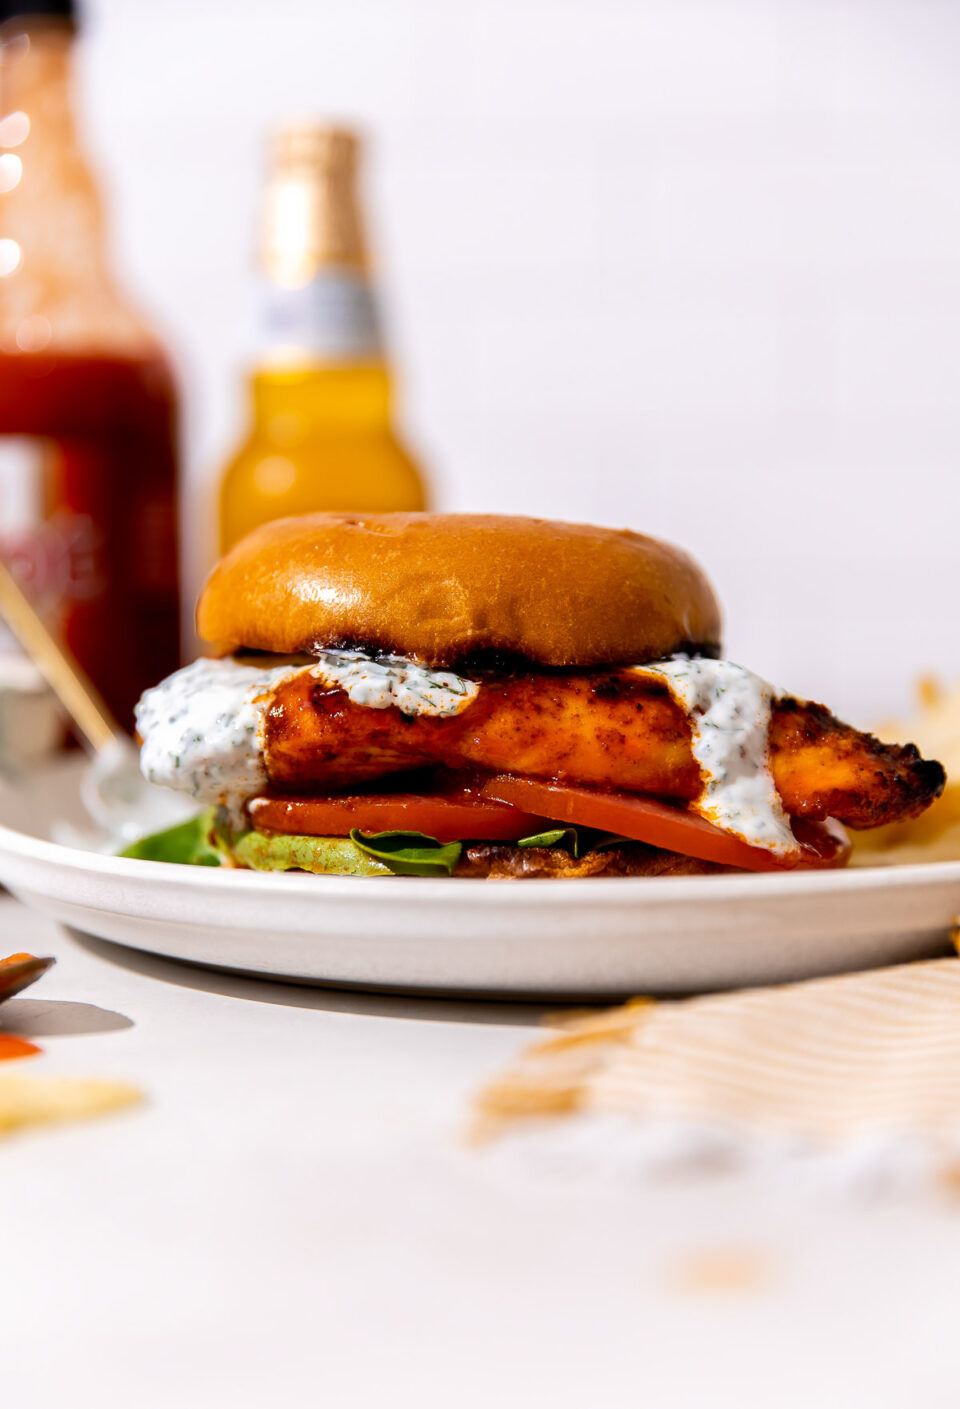 A finished buffalo chicken sandwich served on a white plate in between a toasted brioche bun with lettuce, tomato, and herb ranch yogurt drizzled on top. The white plate sits atop a creamy white textured surface with a small bowl of herb ranch yogurt, a bottle of Franks' RedHot Original, and a bottle of beer shown in the background.